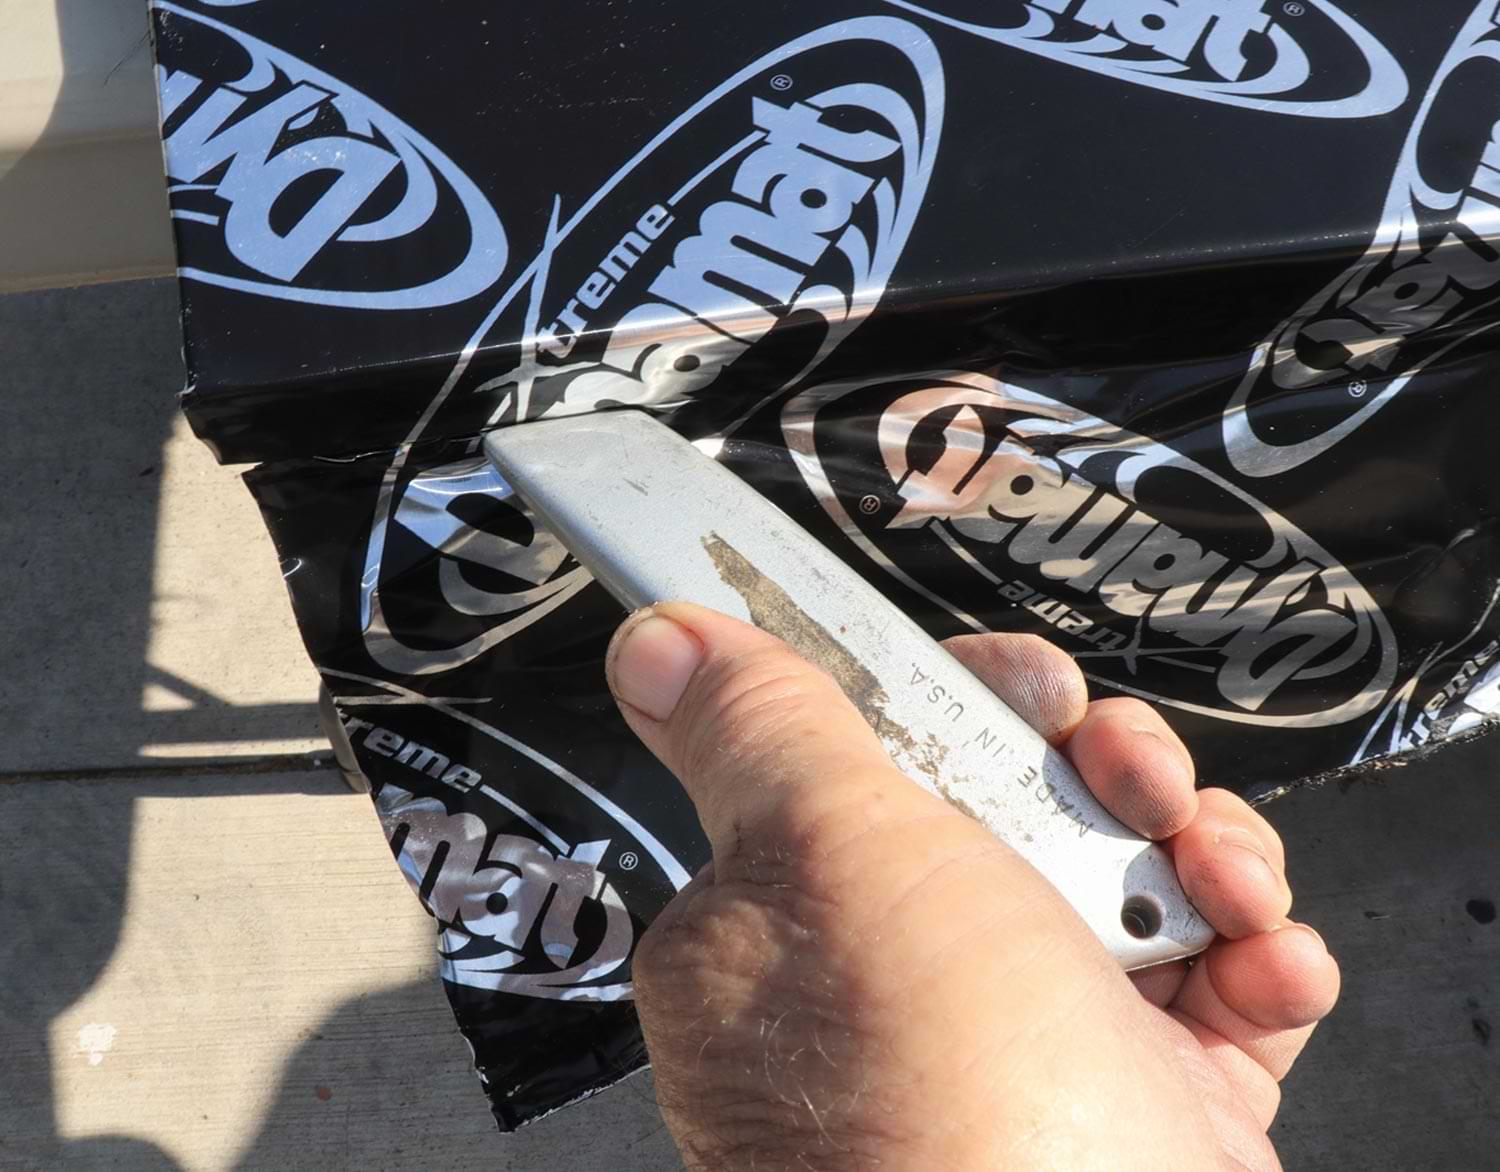 mechanic uses a matte knife with a new blade to cut the access Dynamat